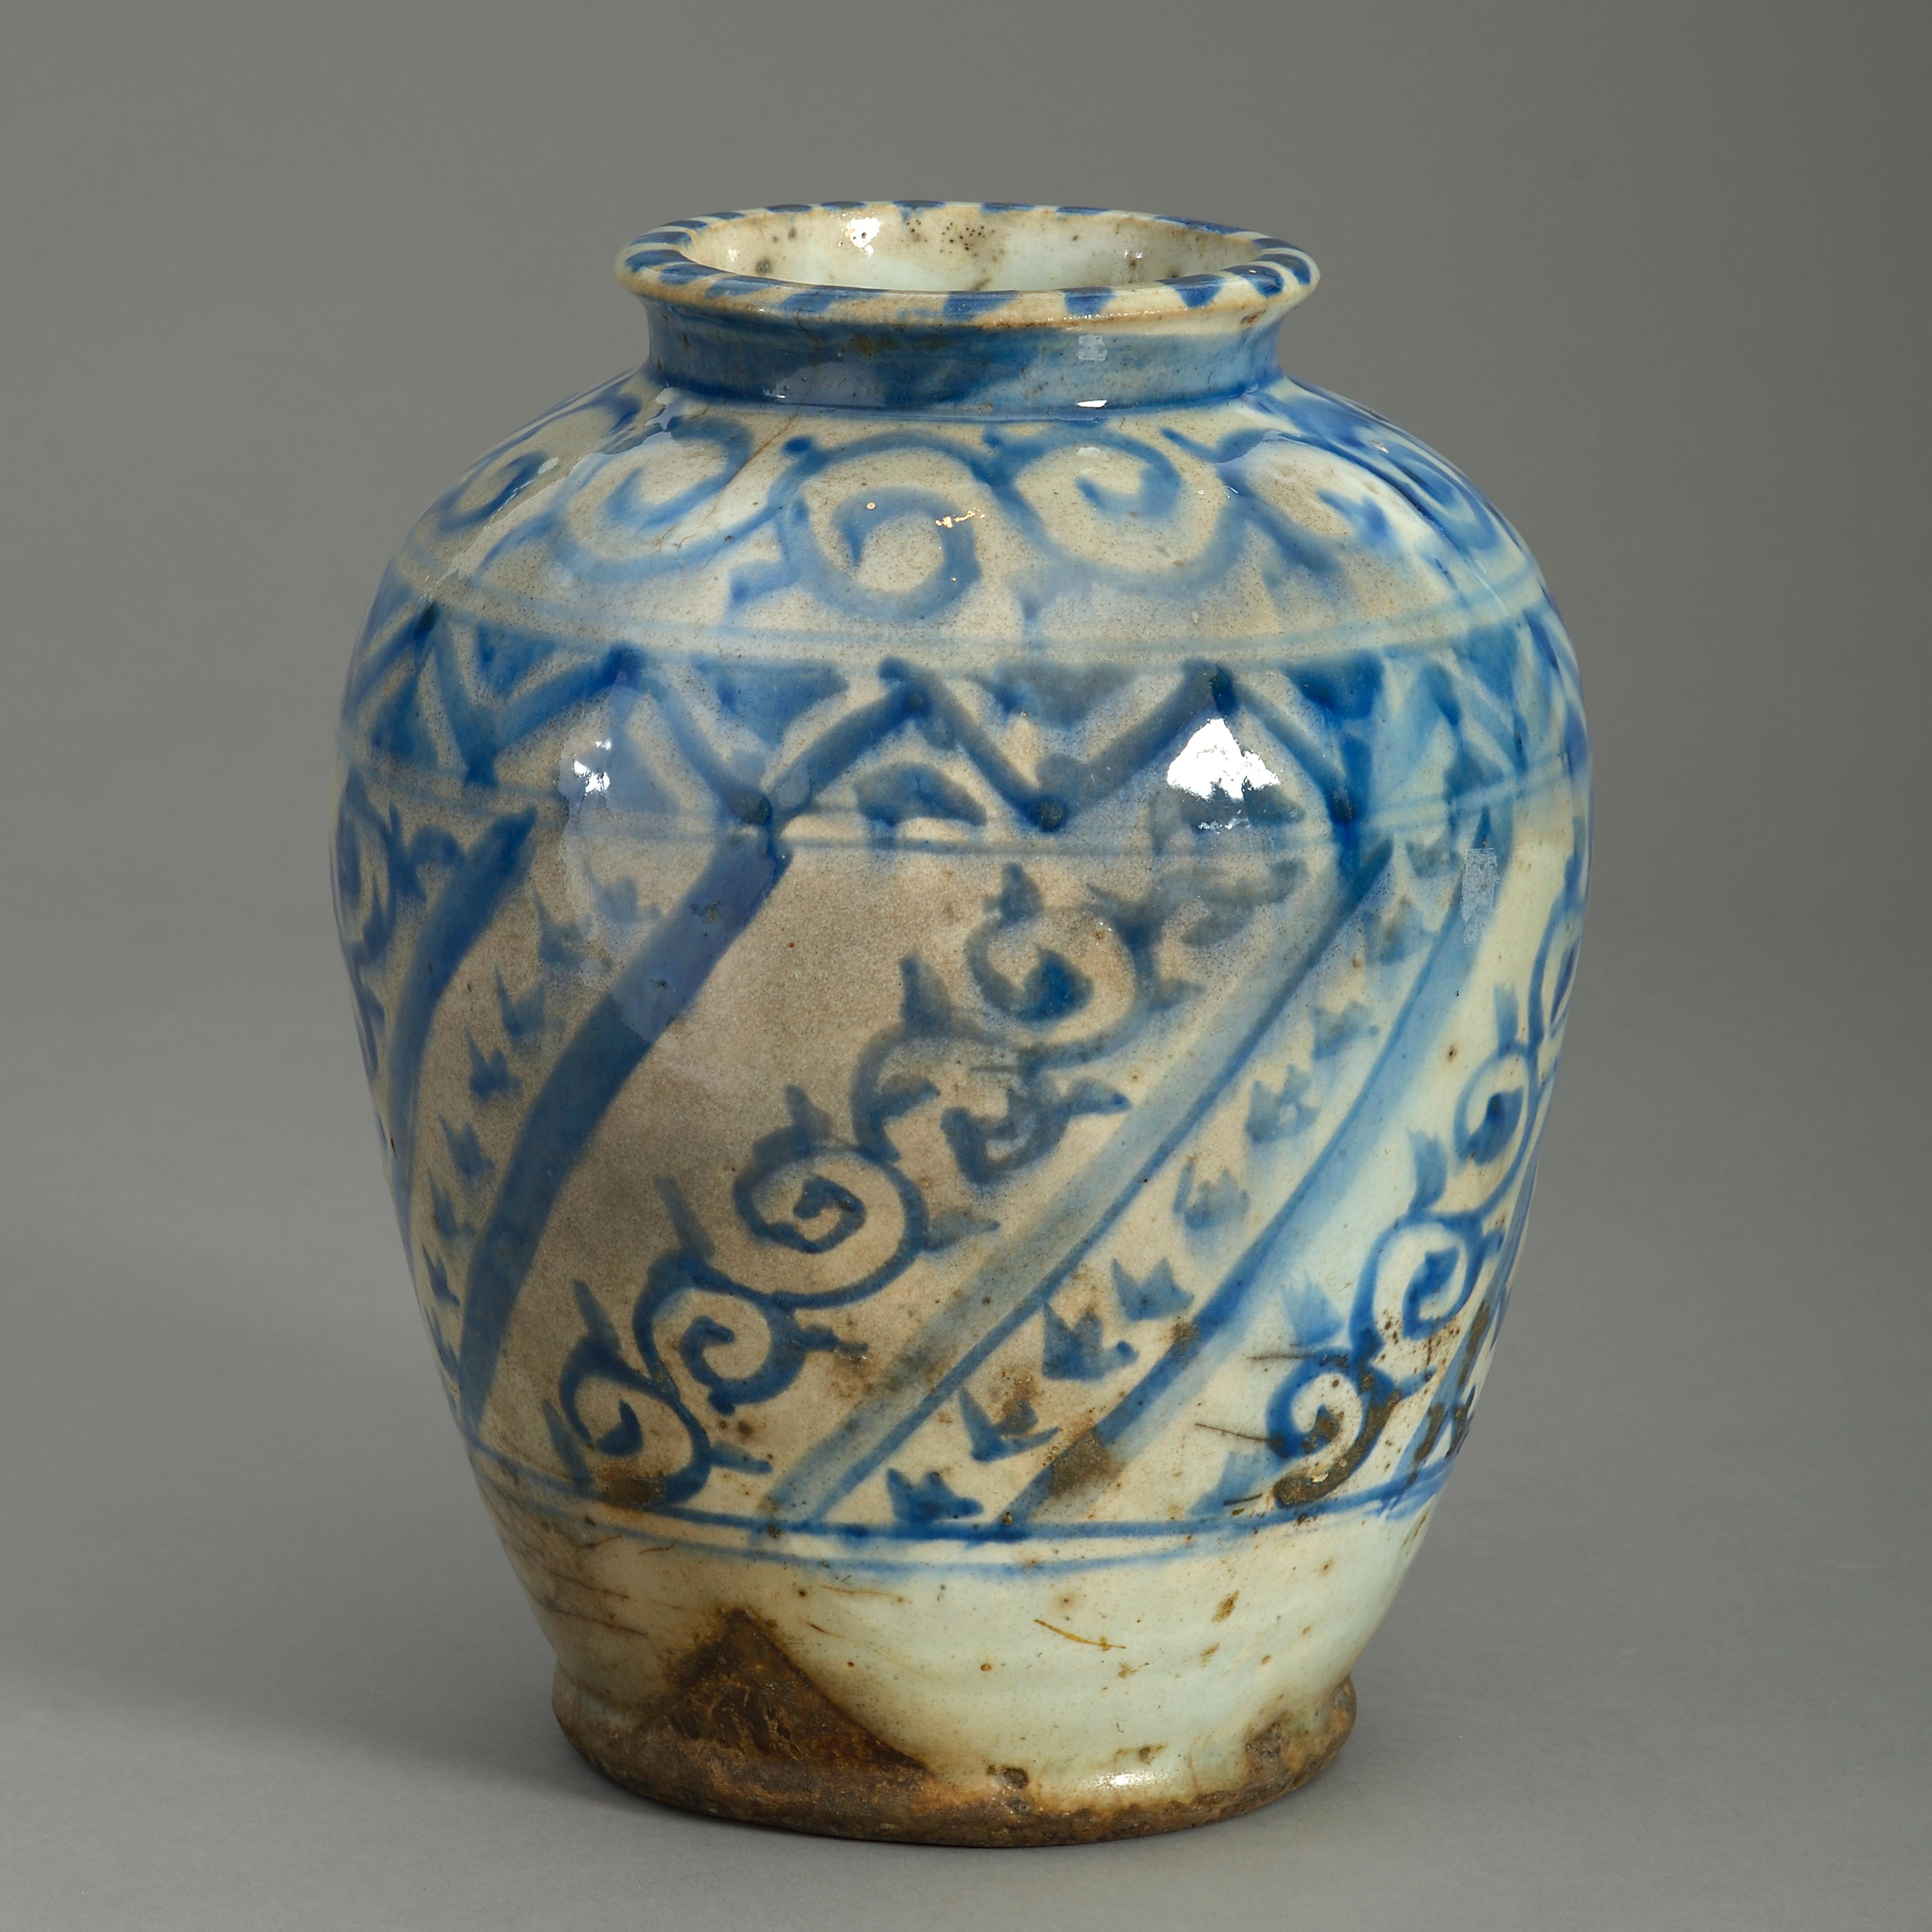 A charming late 19th century Persian pottery vase, decorated throughout with scrollwork and banding in blue glazes upon a white ground.